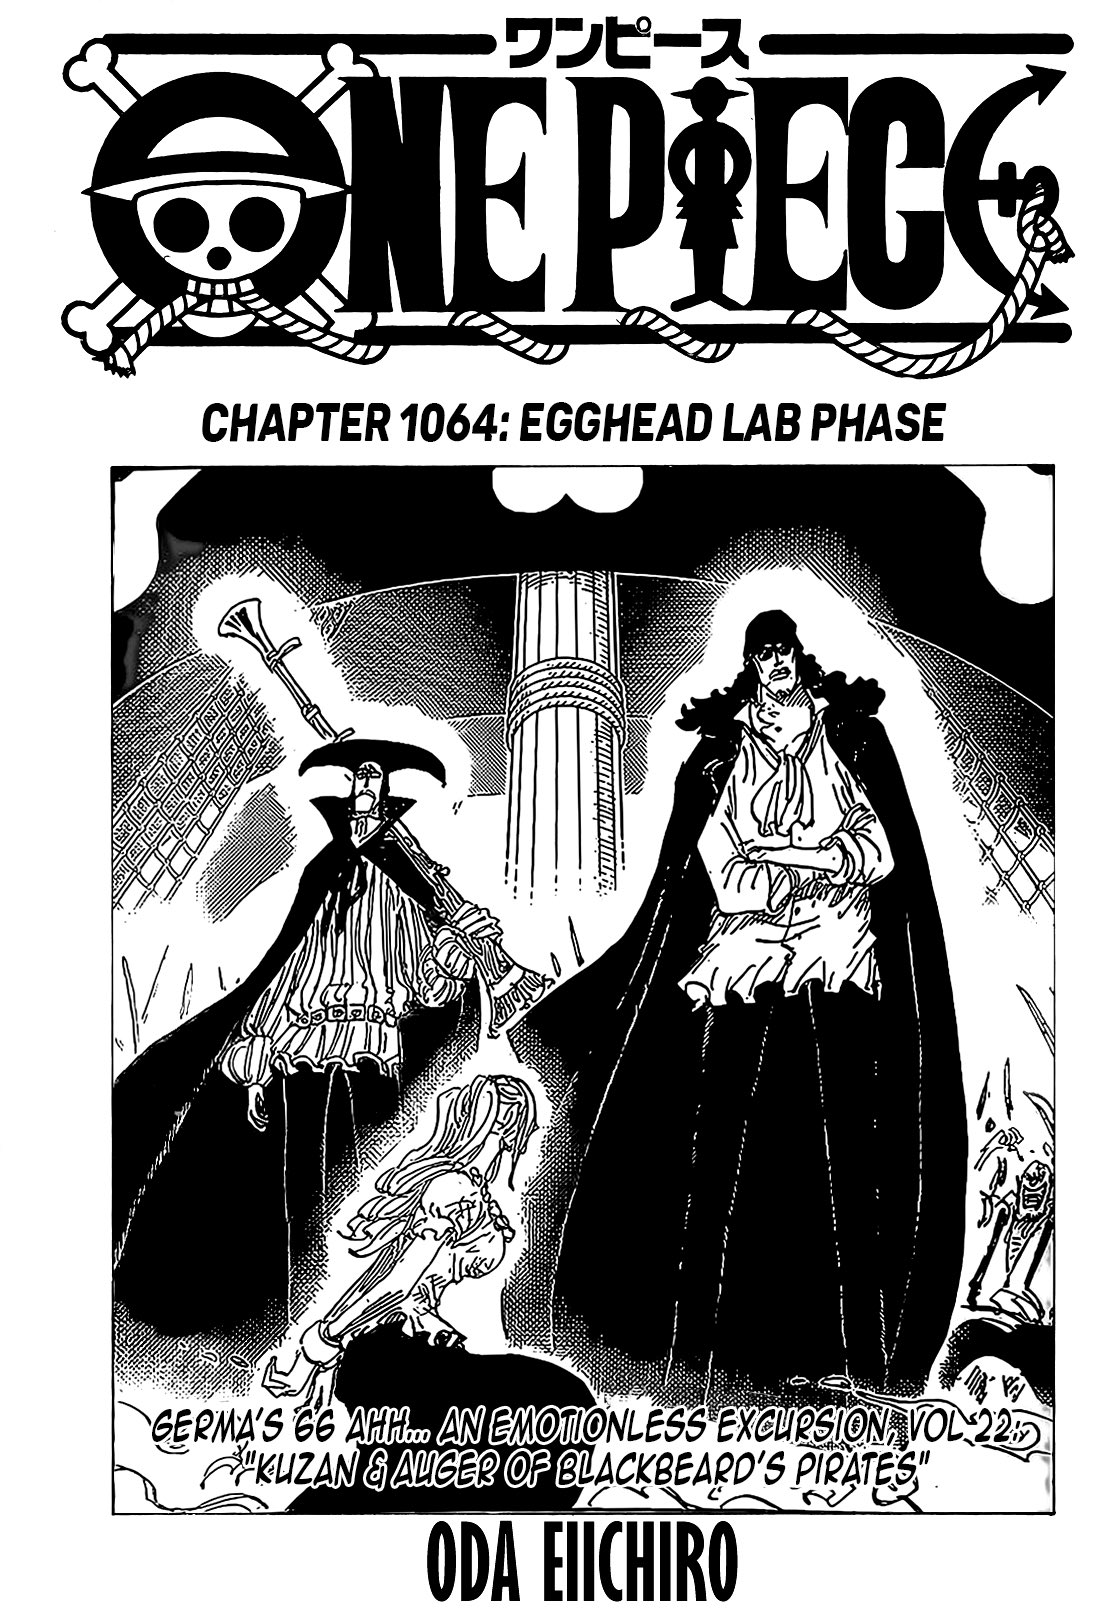 One Piece Chapter 1064 Cover Page